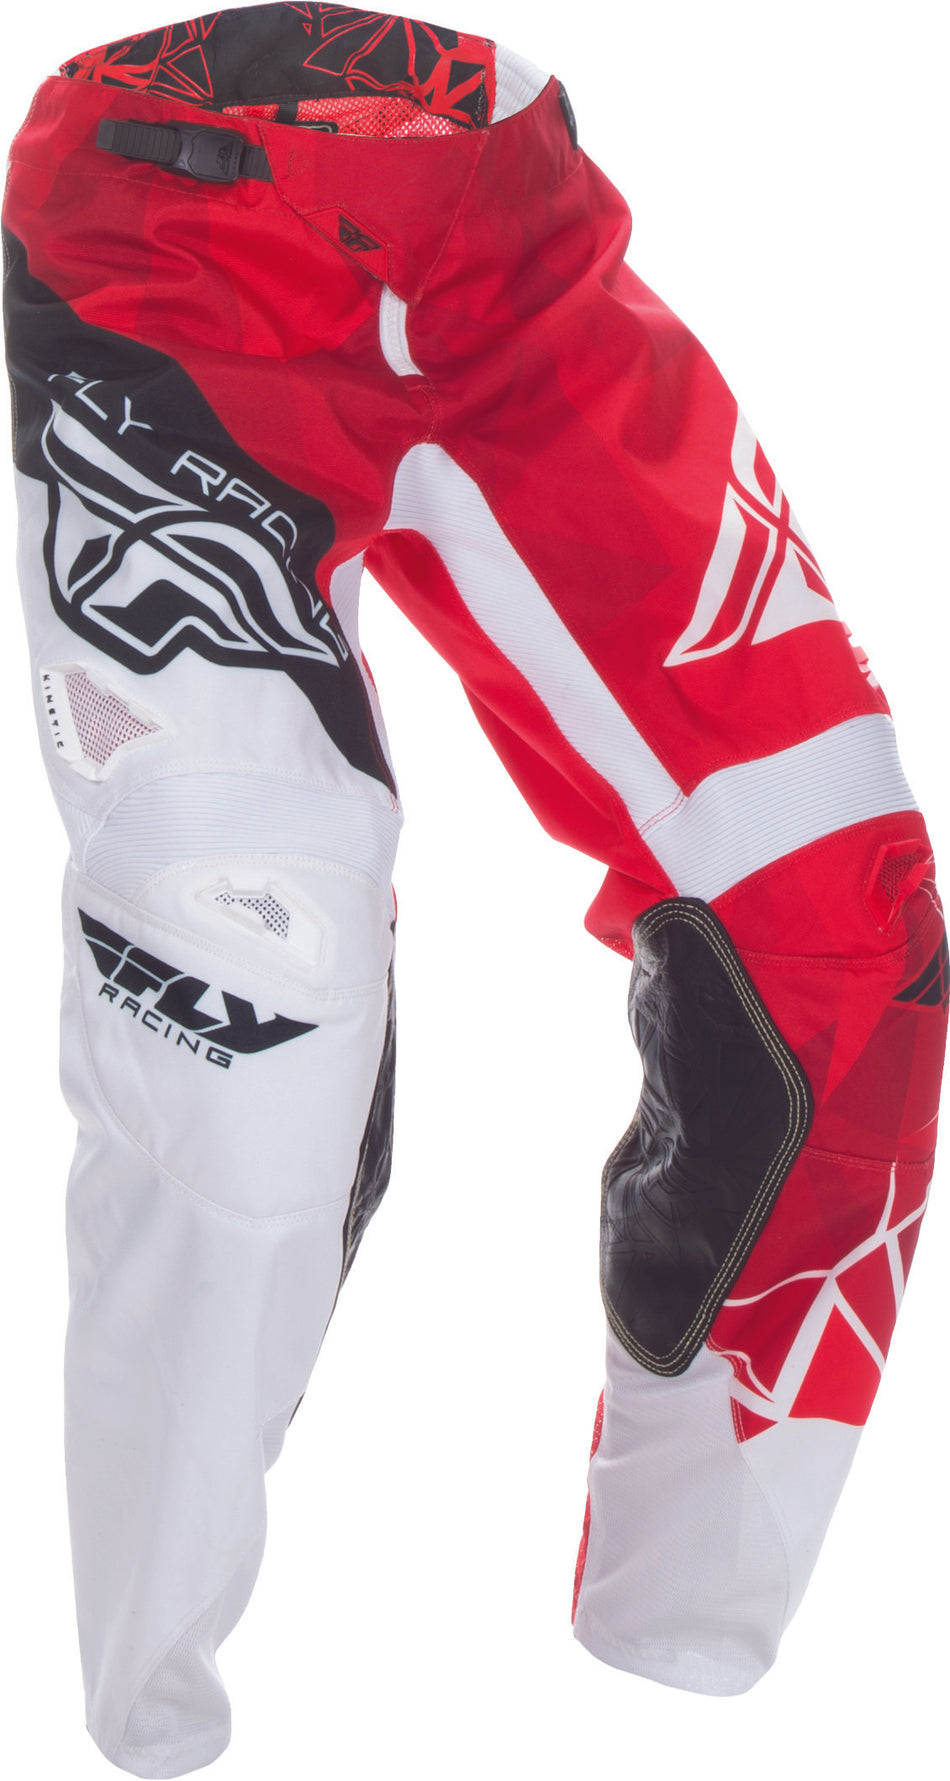 FLY RACING Kinetic Crux Pant Red/White Sz 36 370-53236